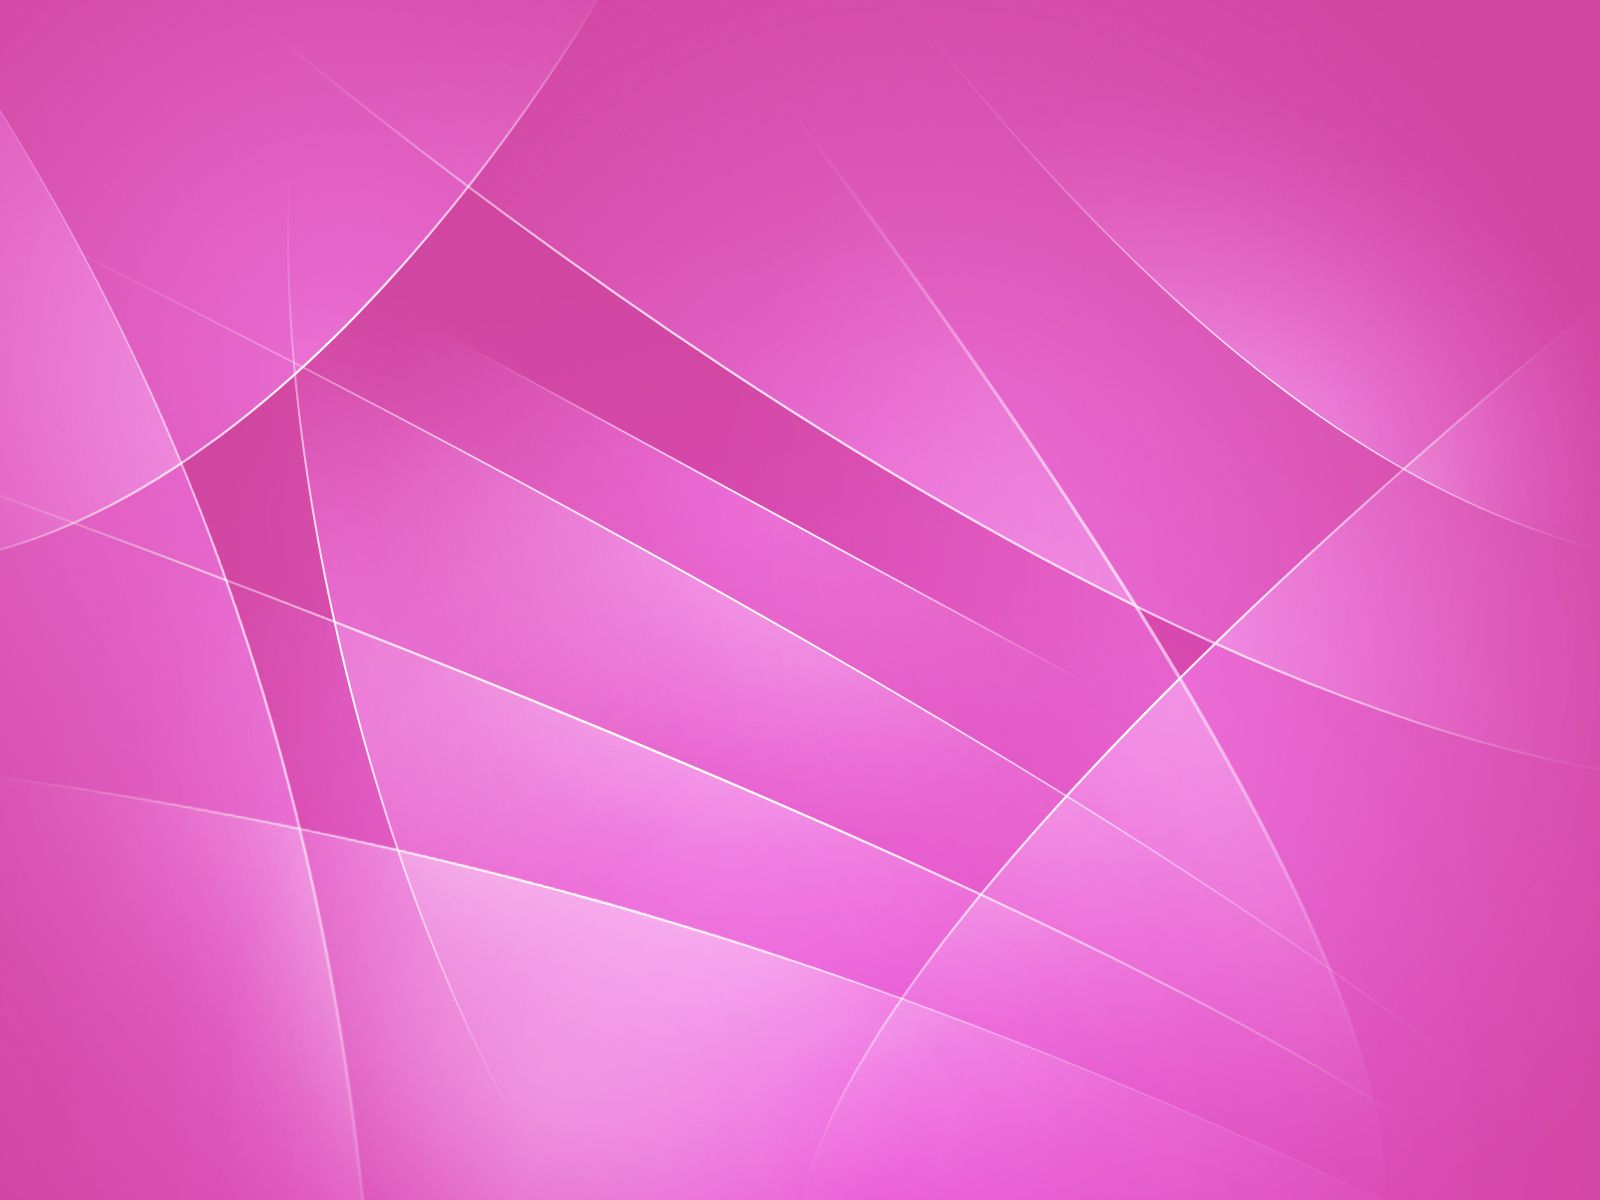 Pink Color Widescreen Desktop Backgrounds Pic Mch095165 - Free Background  Pink 4k - 1600x1200 Wallpaper 